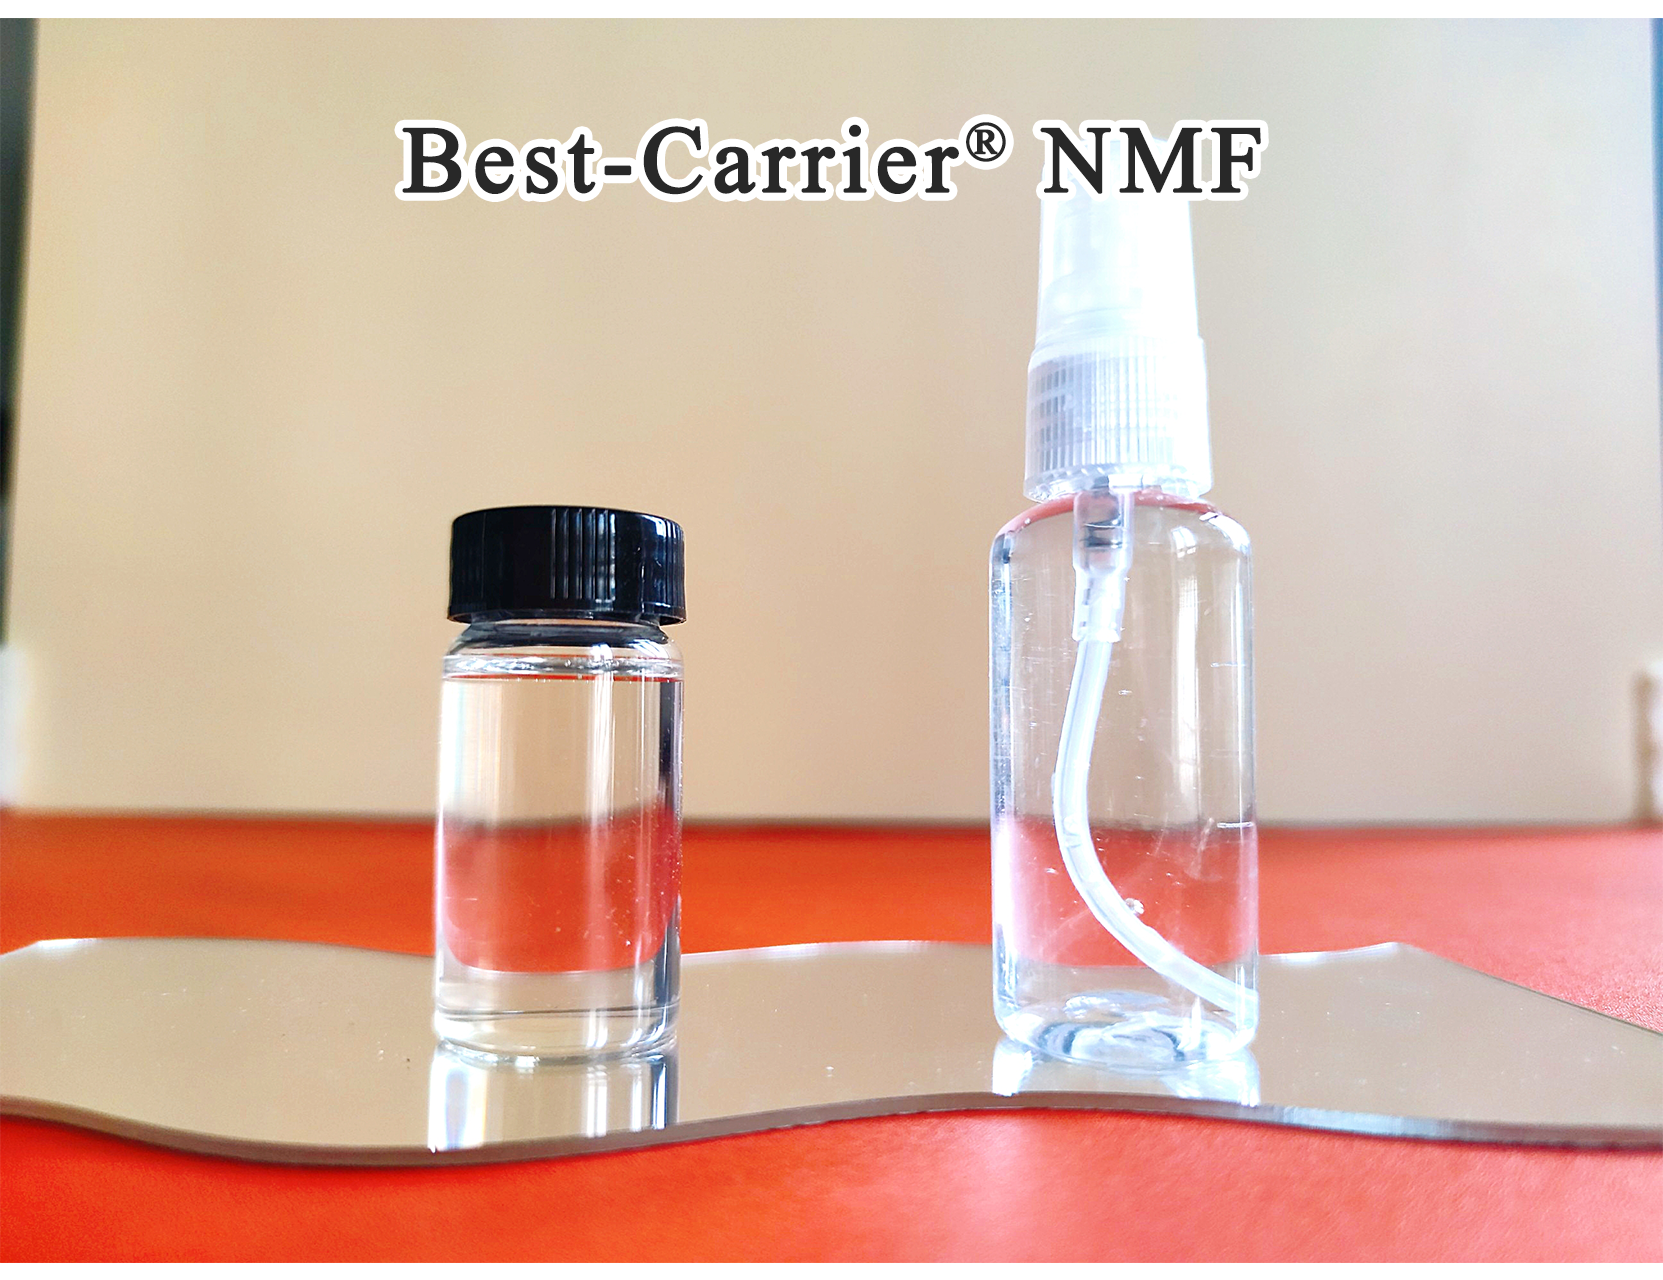 Best-Carrier® NMF